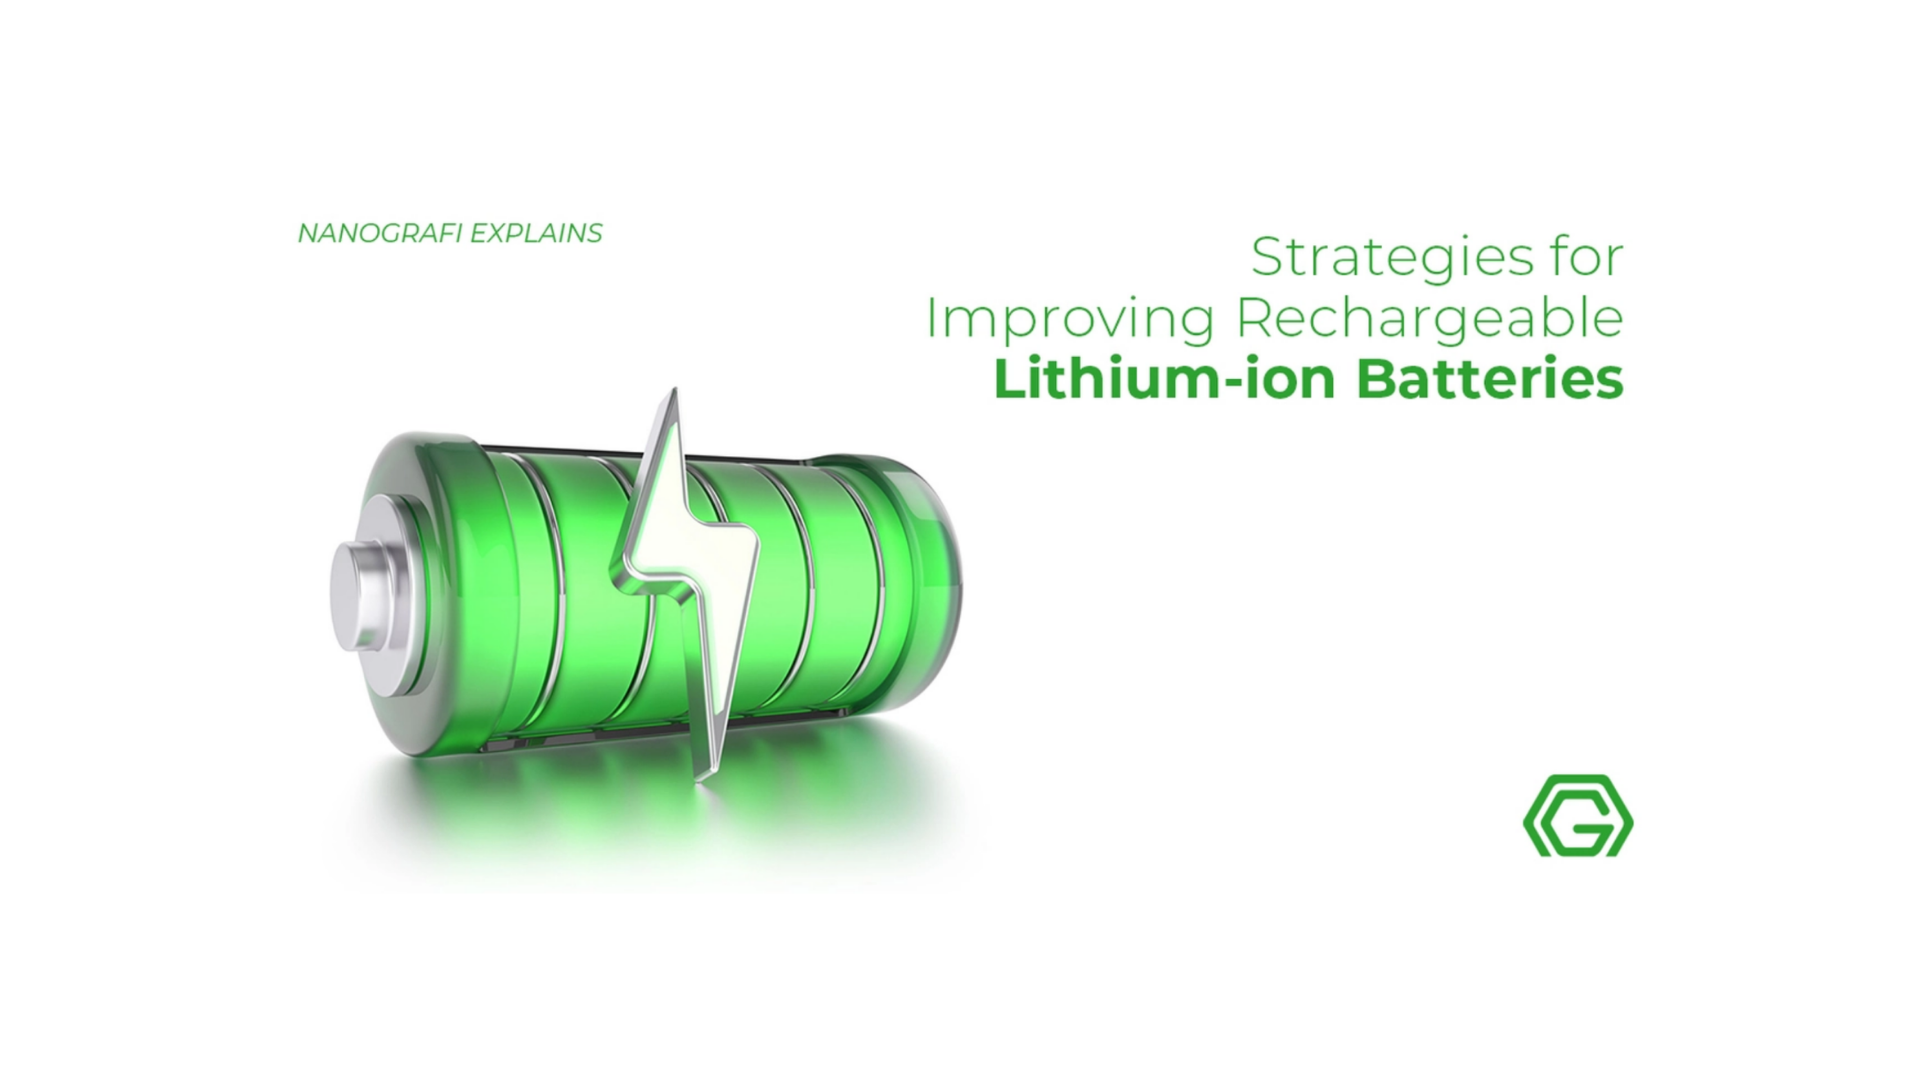 Strategies for improving rechargeable lithium-ion batteries